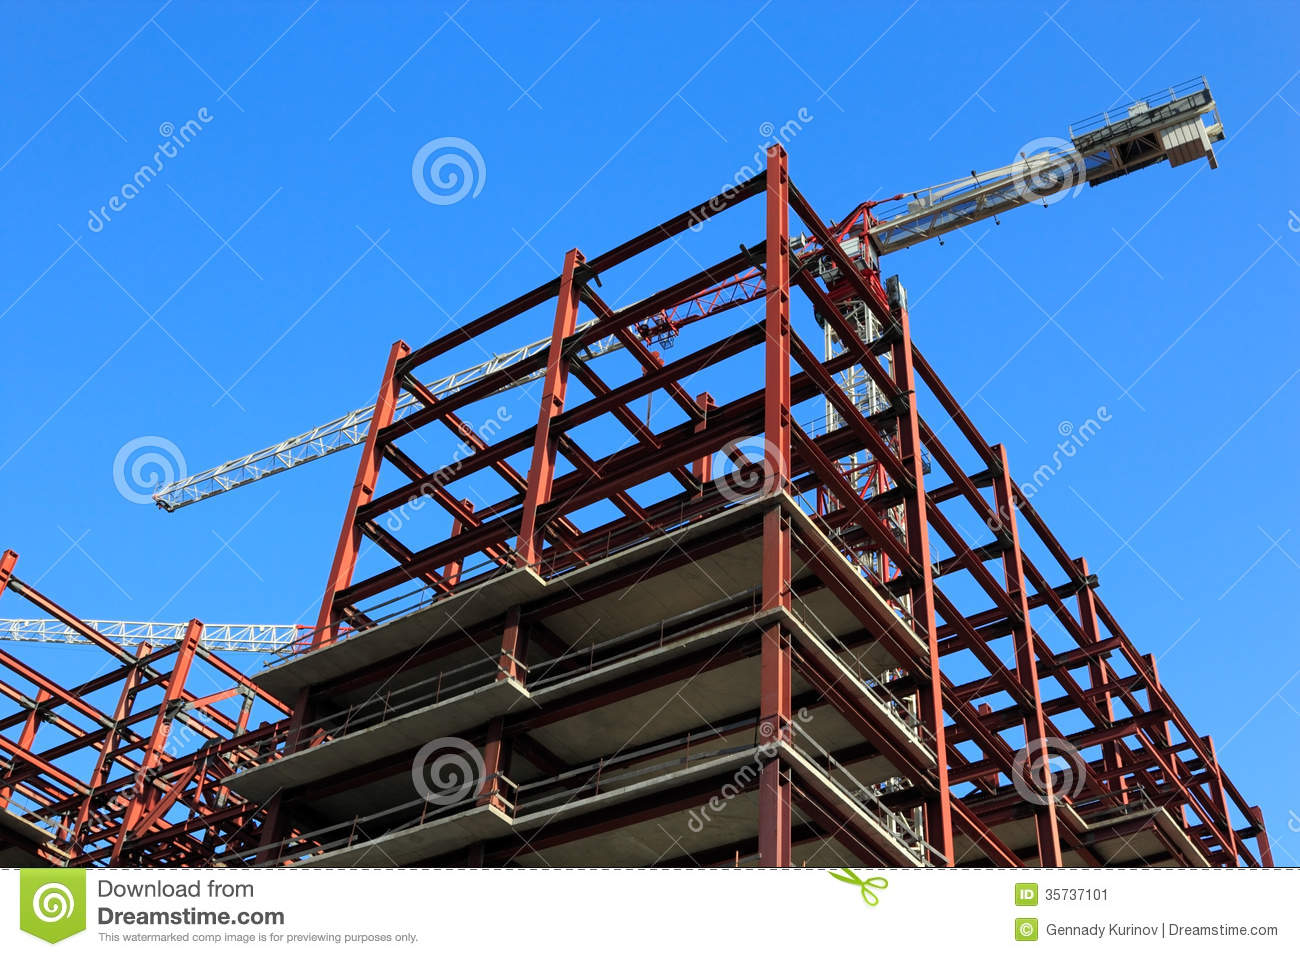 Building Construction Stock Image   Image  35737101